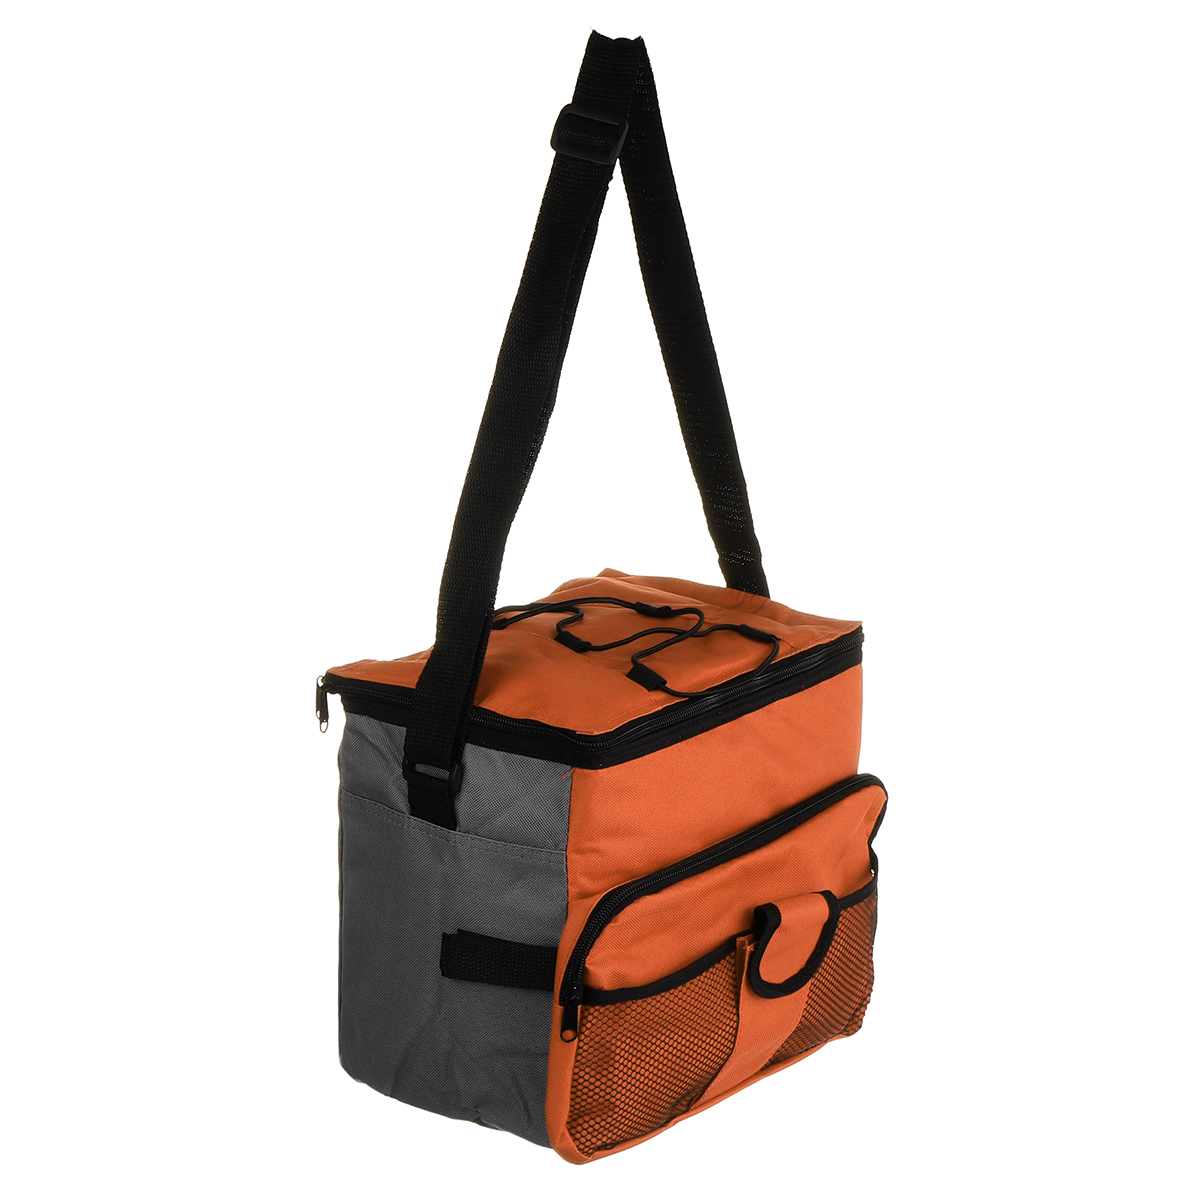 3L-Insulated-Lunch-Bag-Food-Container-Box-Bag-Food-Delivery-Bag-Waterproof-Lightweight-Grocery-Stora-1731824-5